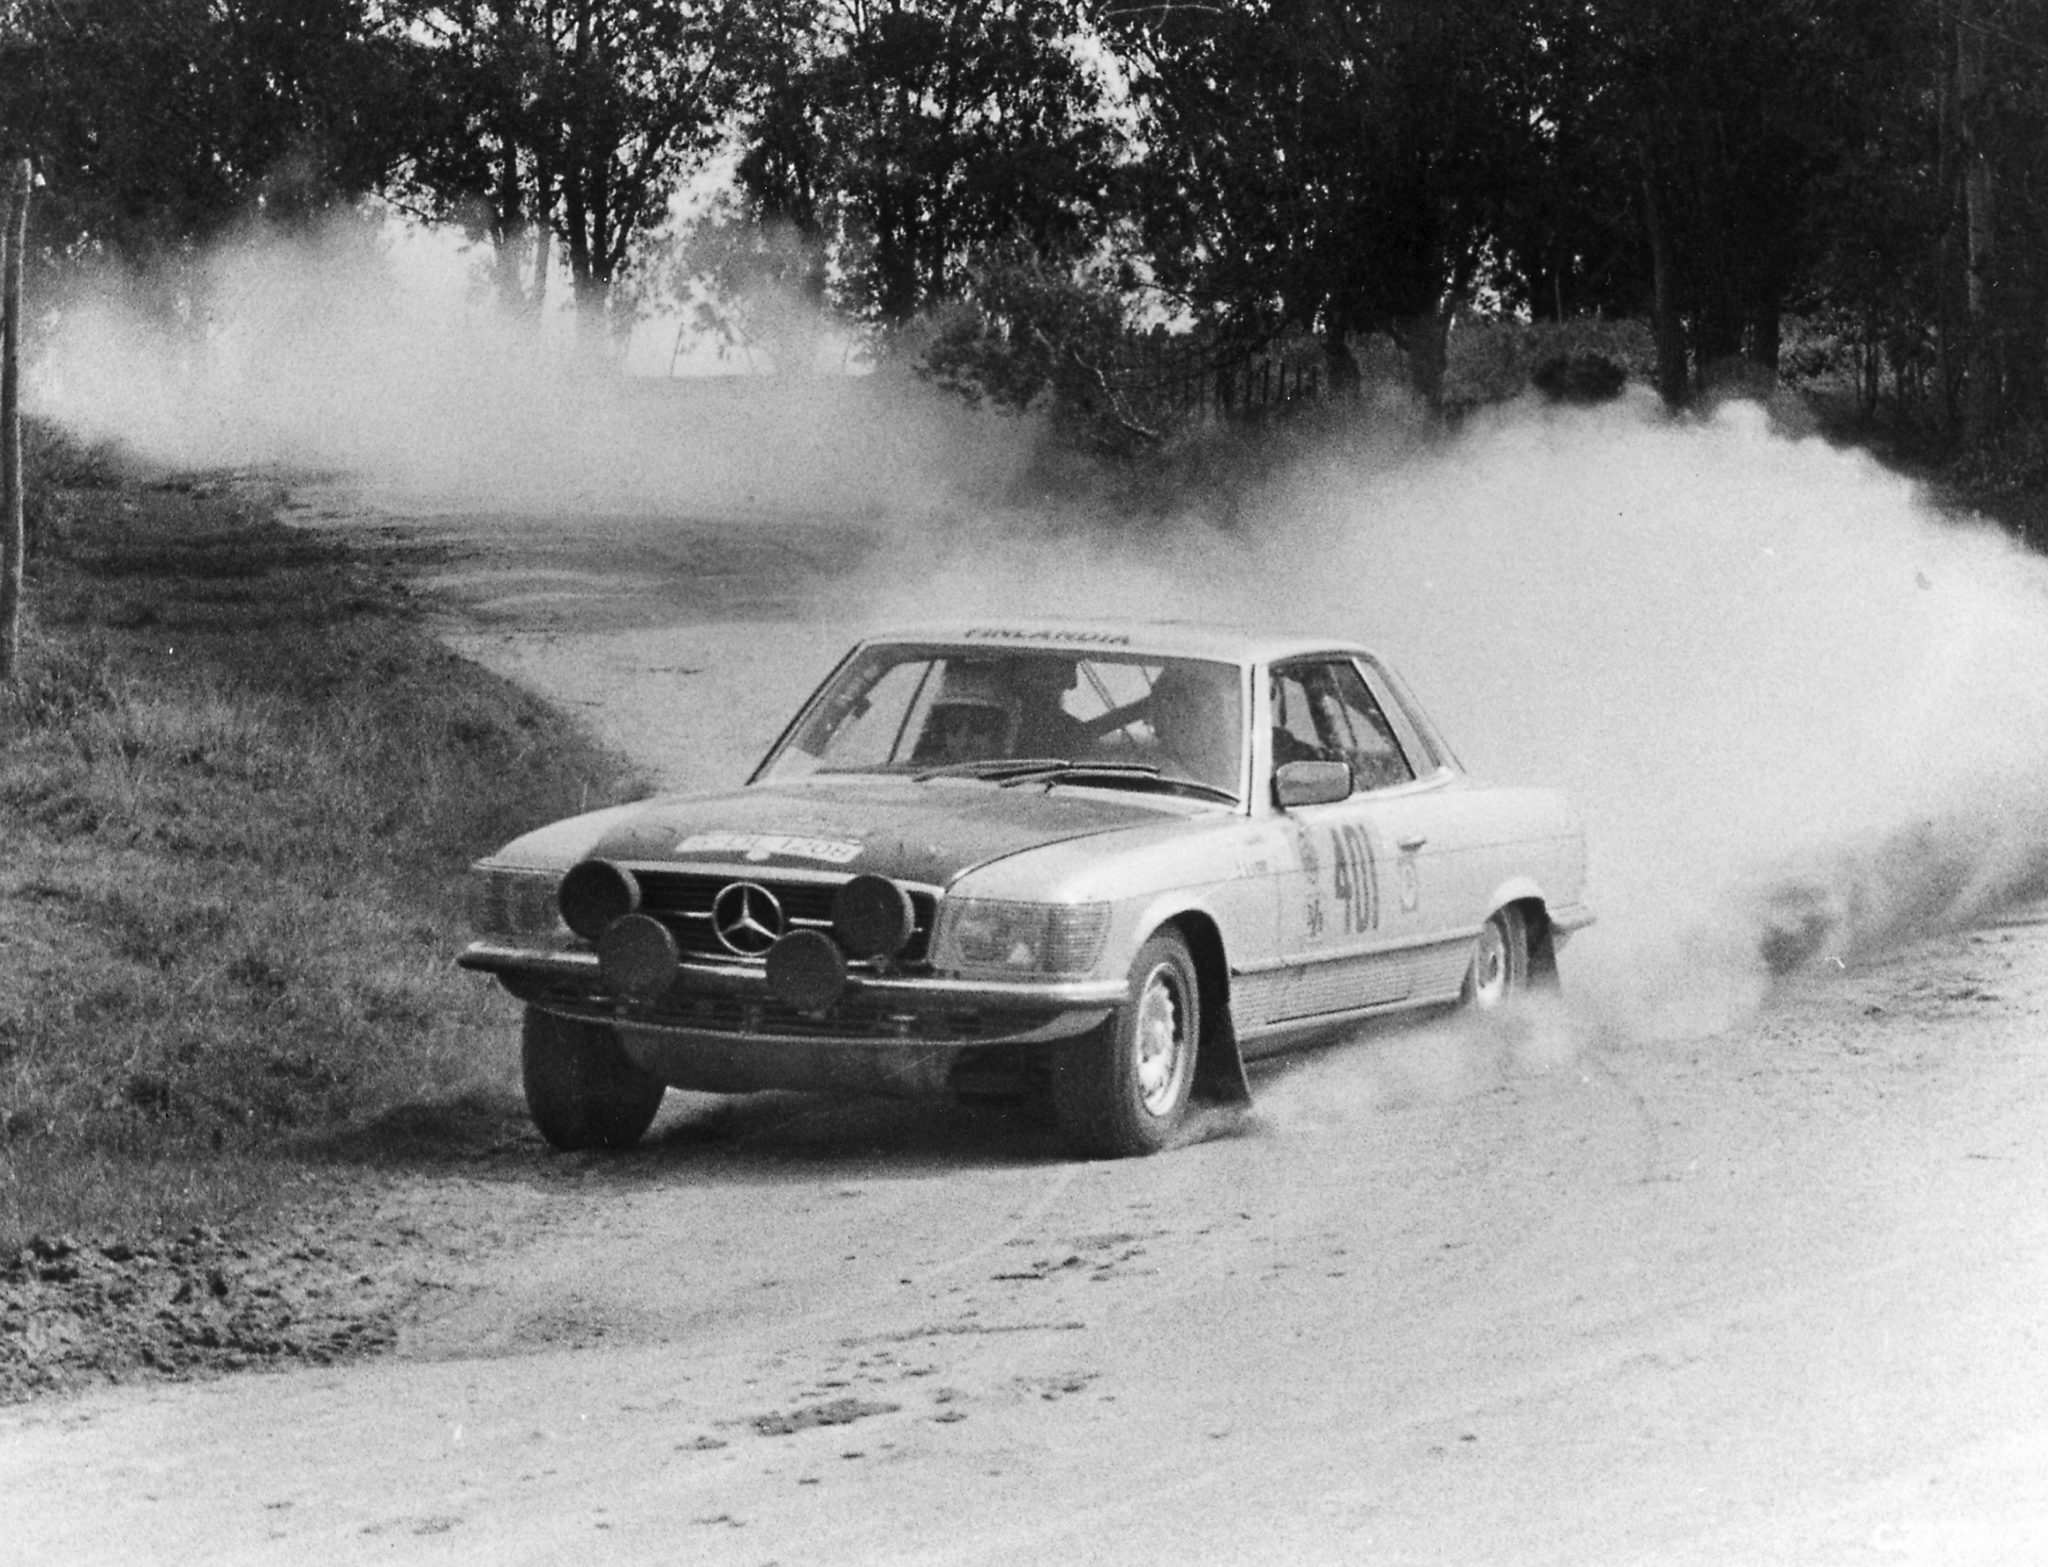 The 450 SLC racing in 1979.